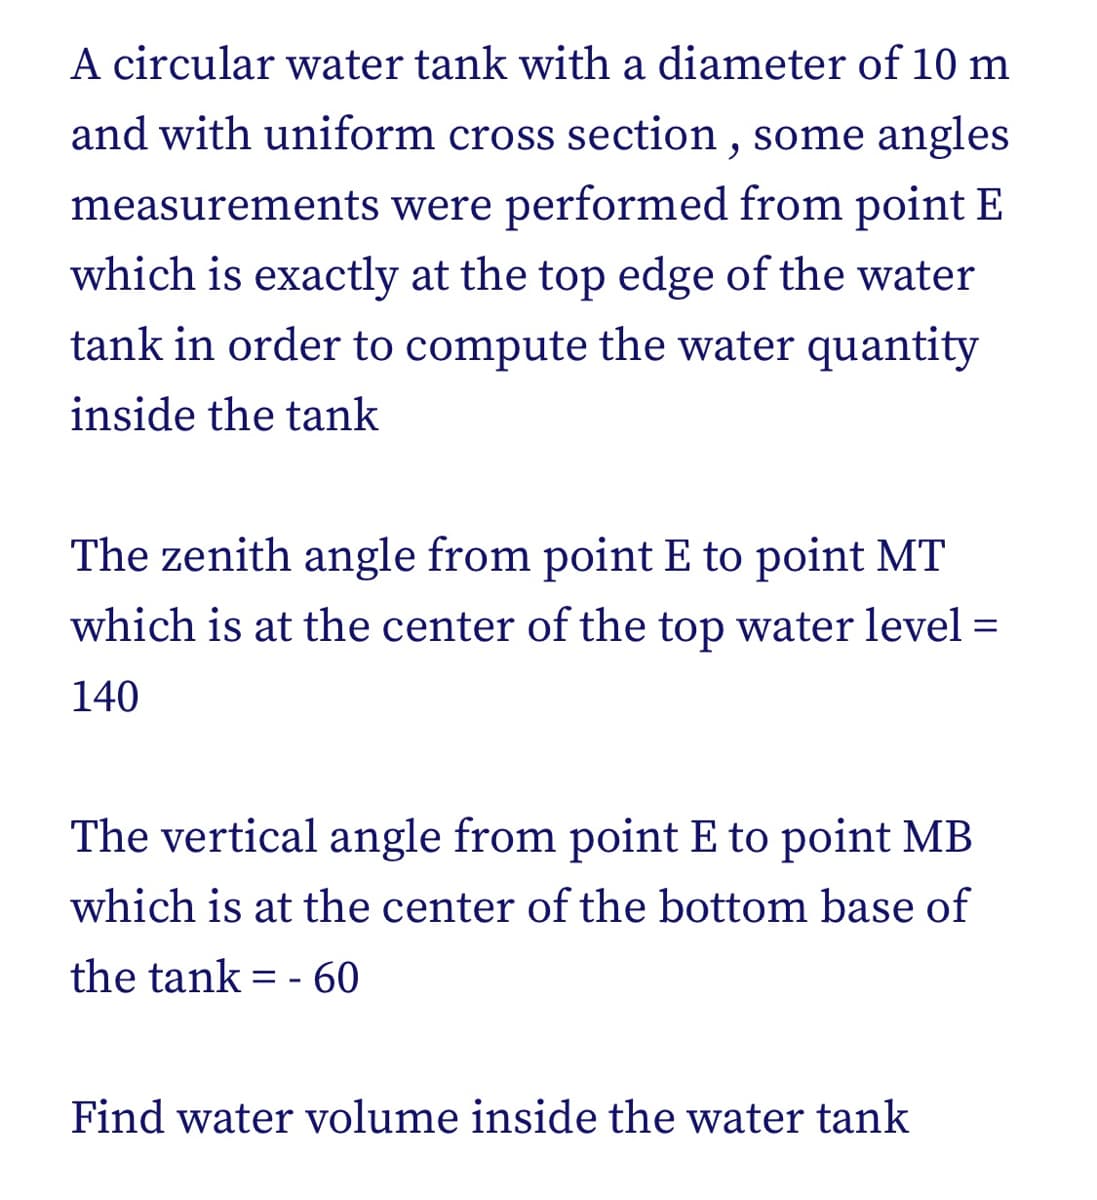 A circular water tank with a diameter of 10 m
and with uniform cross section , some angles
measurements were performed from point E
which is exactly at the top edge of the water
tank in order to compute the water quantity
inside the tank
The zenith angle from point E to point MT
which is at the center of the top water level =
140
The vertical angle from point E to point MB
which is at the center of the bottom base of
the tank = - 60
%3D
Find water volume inside the water tank
